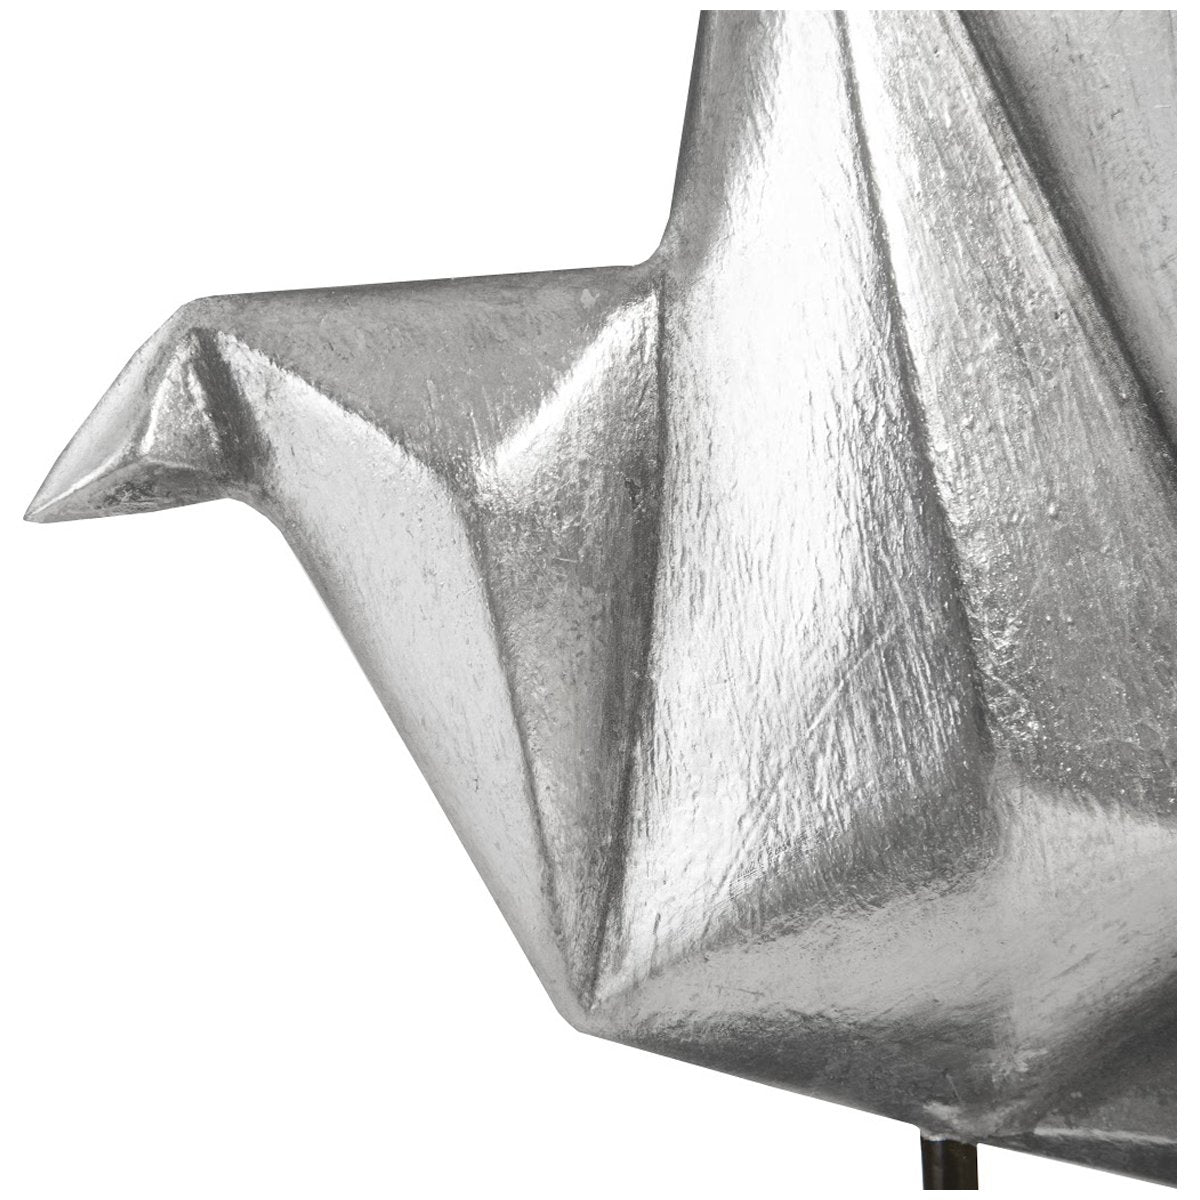 Phillips Collection Origami Bird Table Top Sculpture